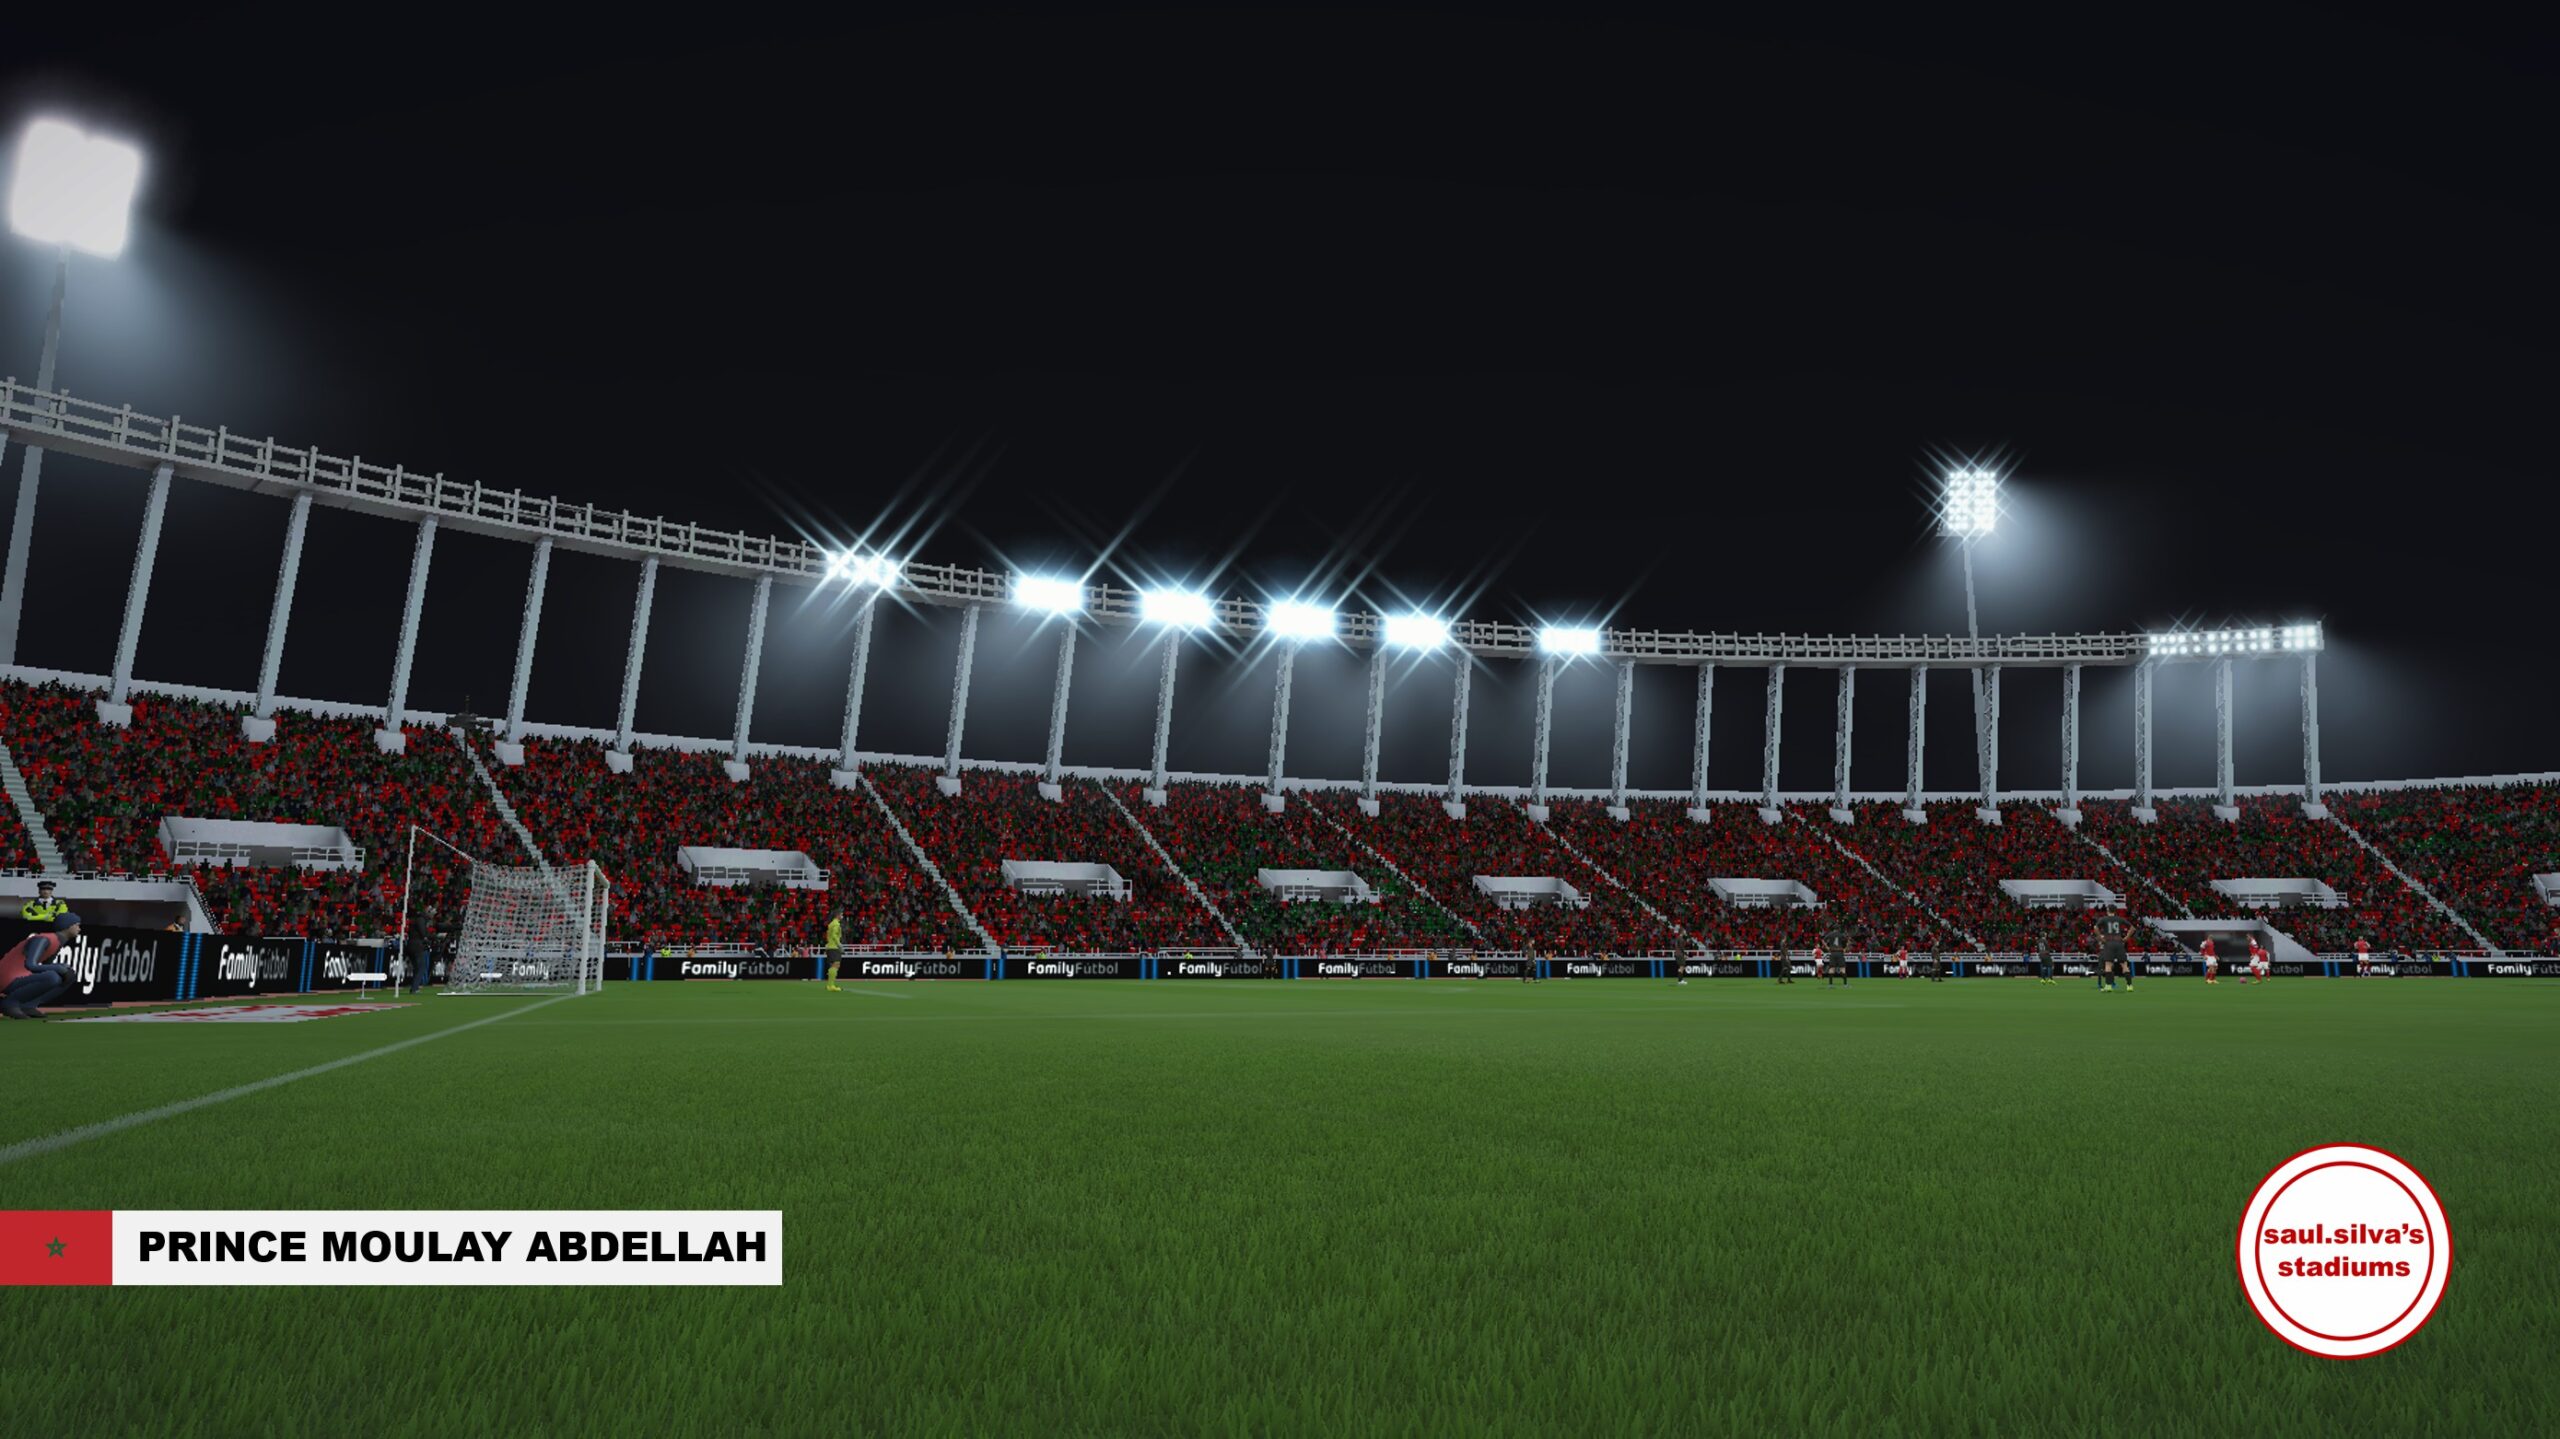 Stade Prince Moulay Abdellah FIFA 16 8 Scaled Stade Prince Moulay Abdellah